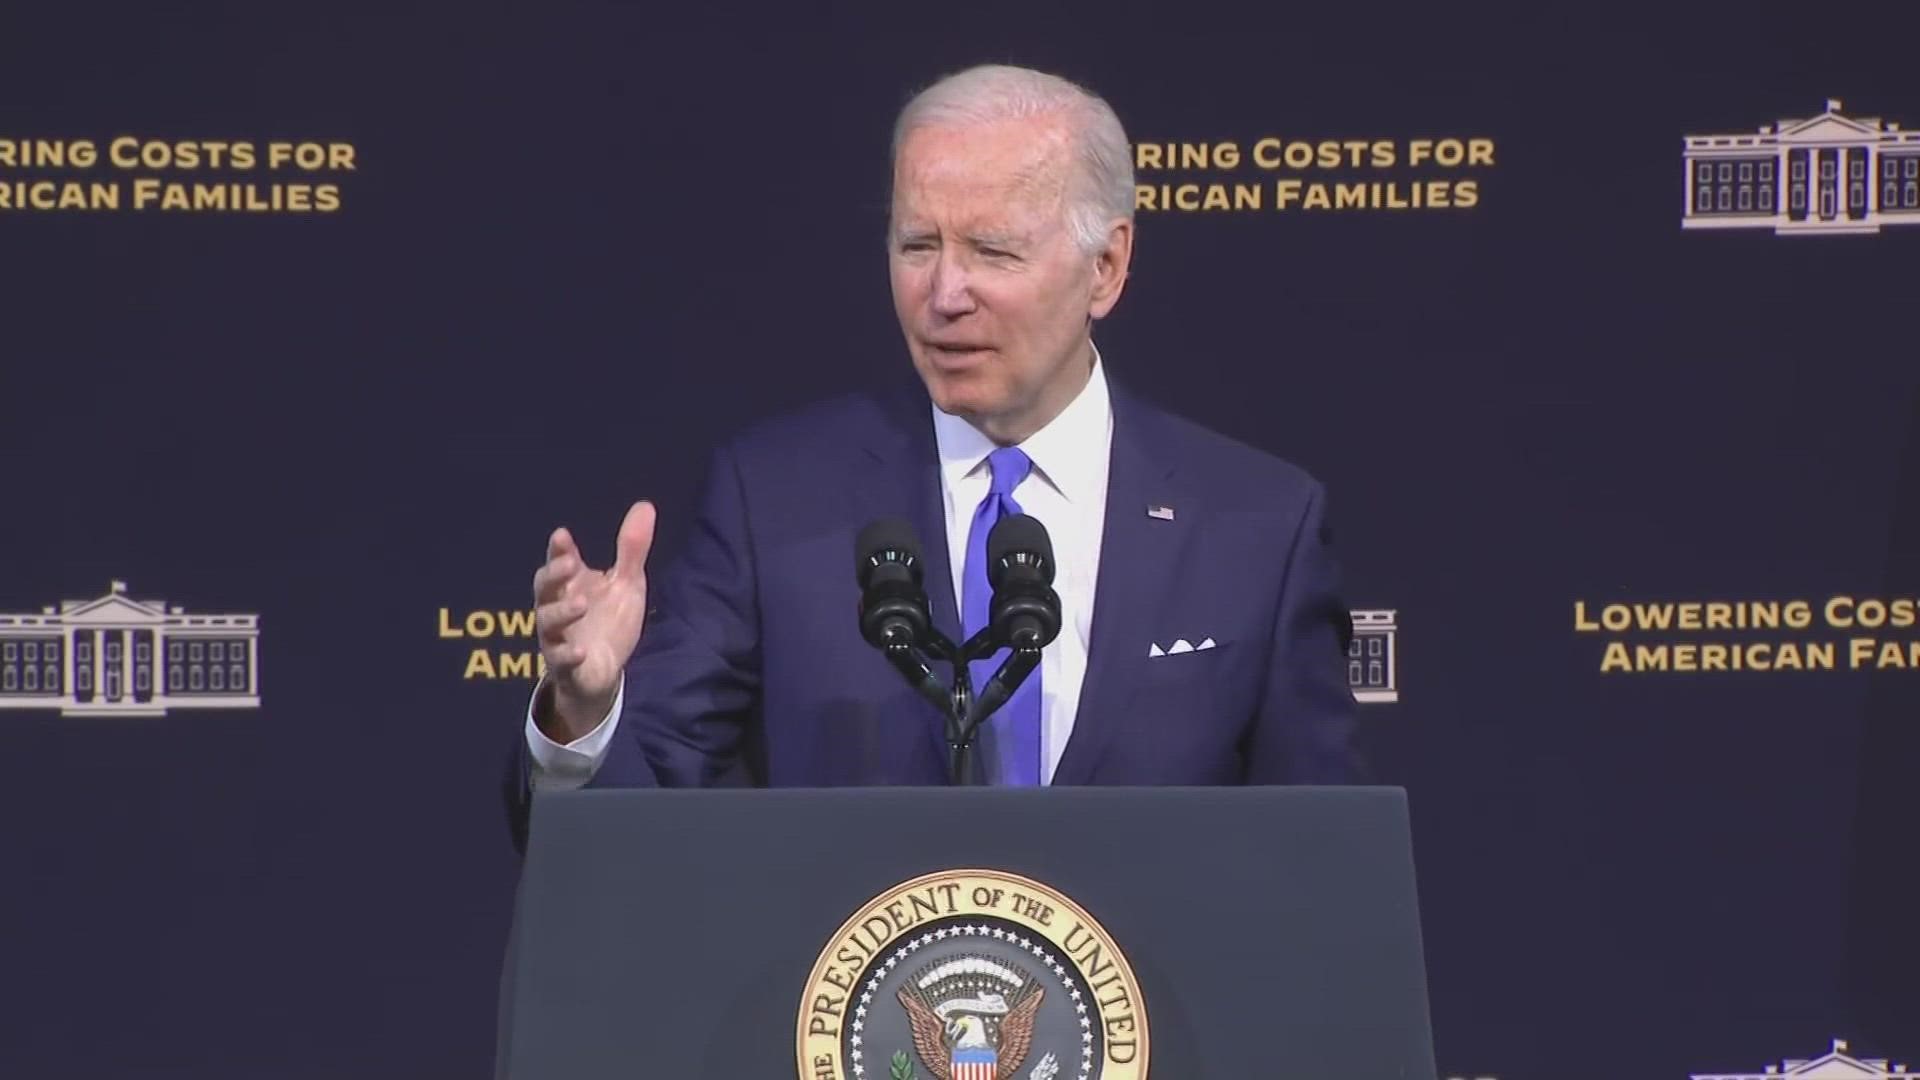 Biden visited Seattle Friday and touched on his efforts to grow the green energy economy, signed an executive order and talked about lowering costs for families.